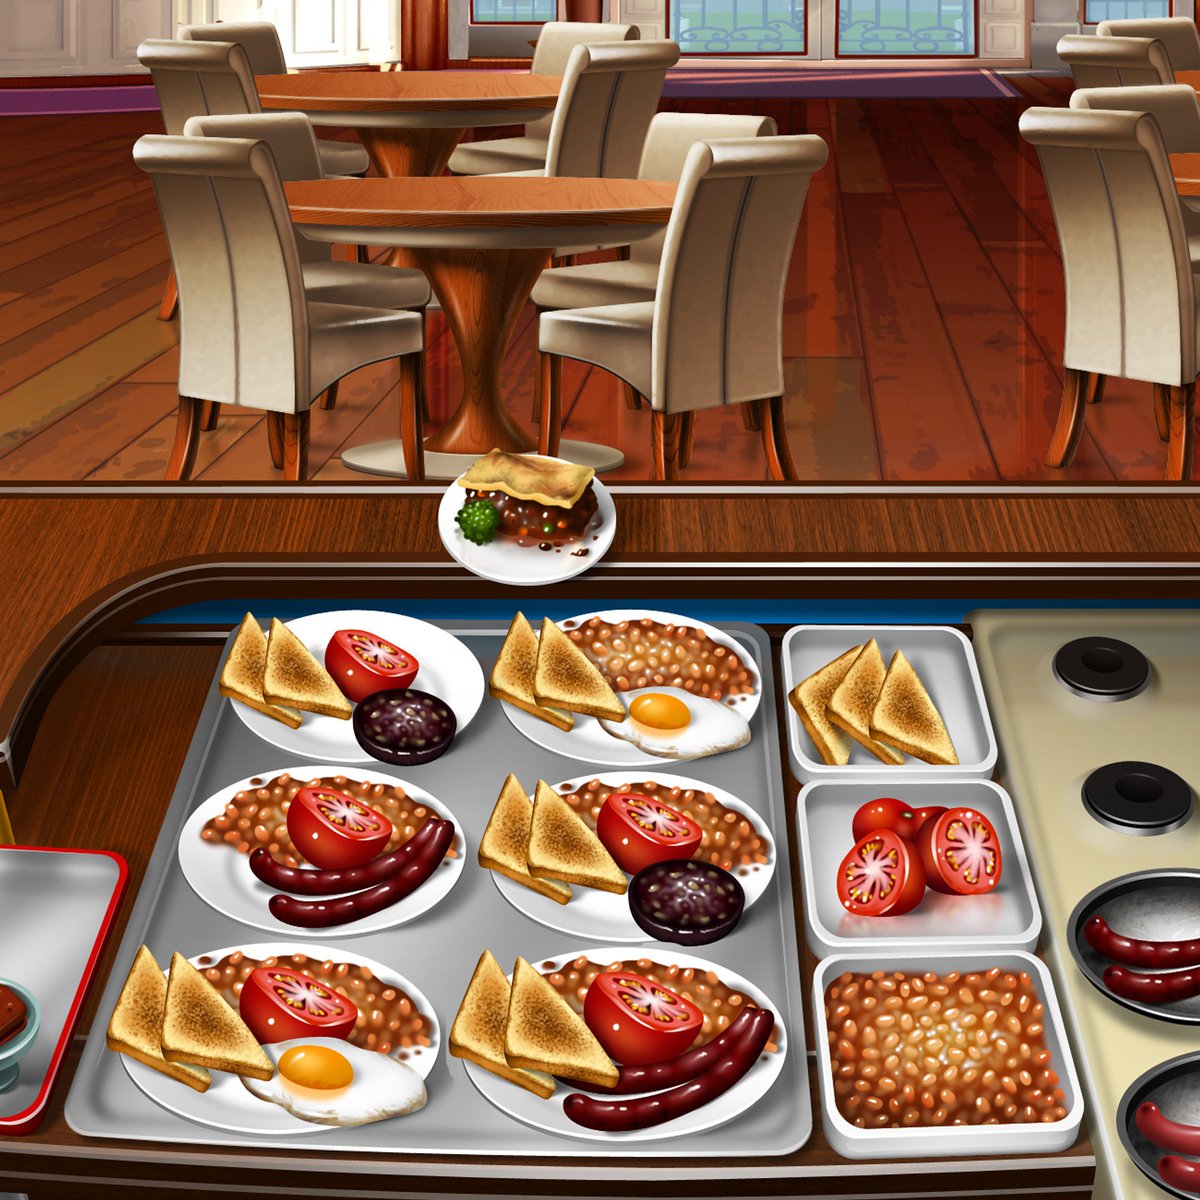 Cooking Fever On Twitter In The Breakfast Cafe You Can Start The